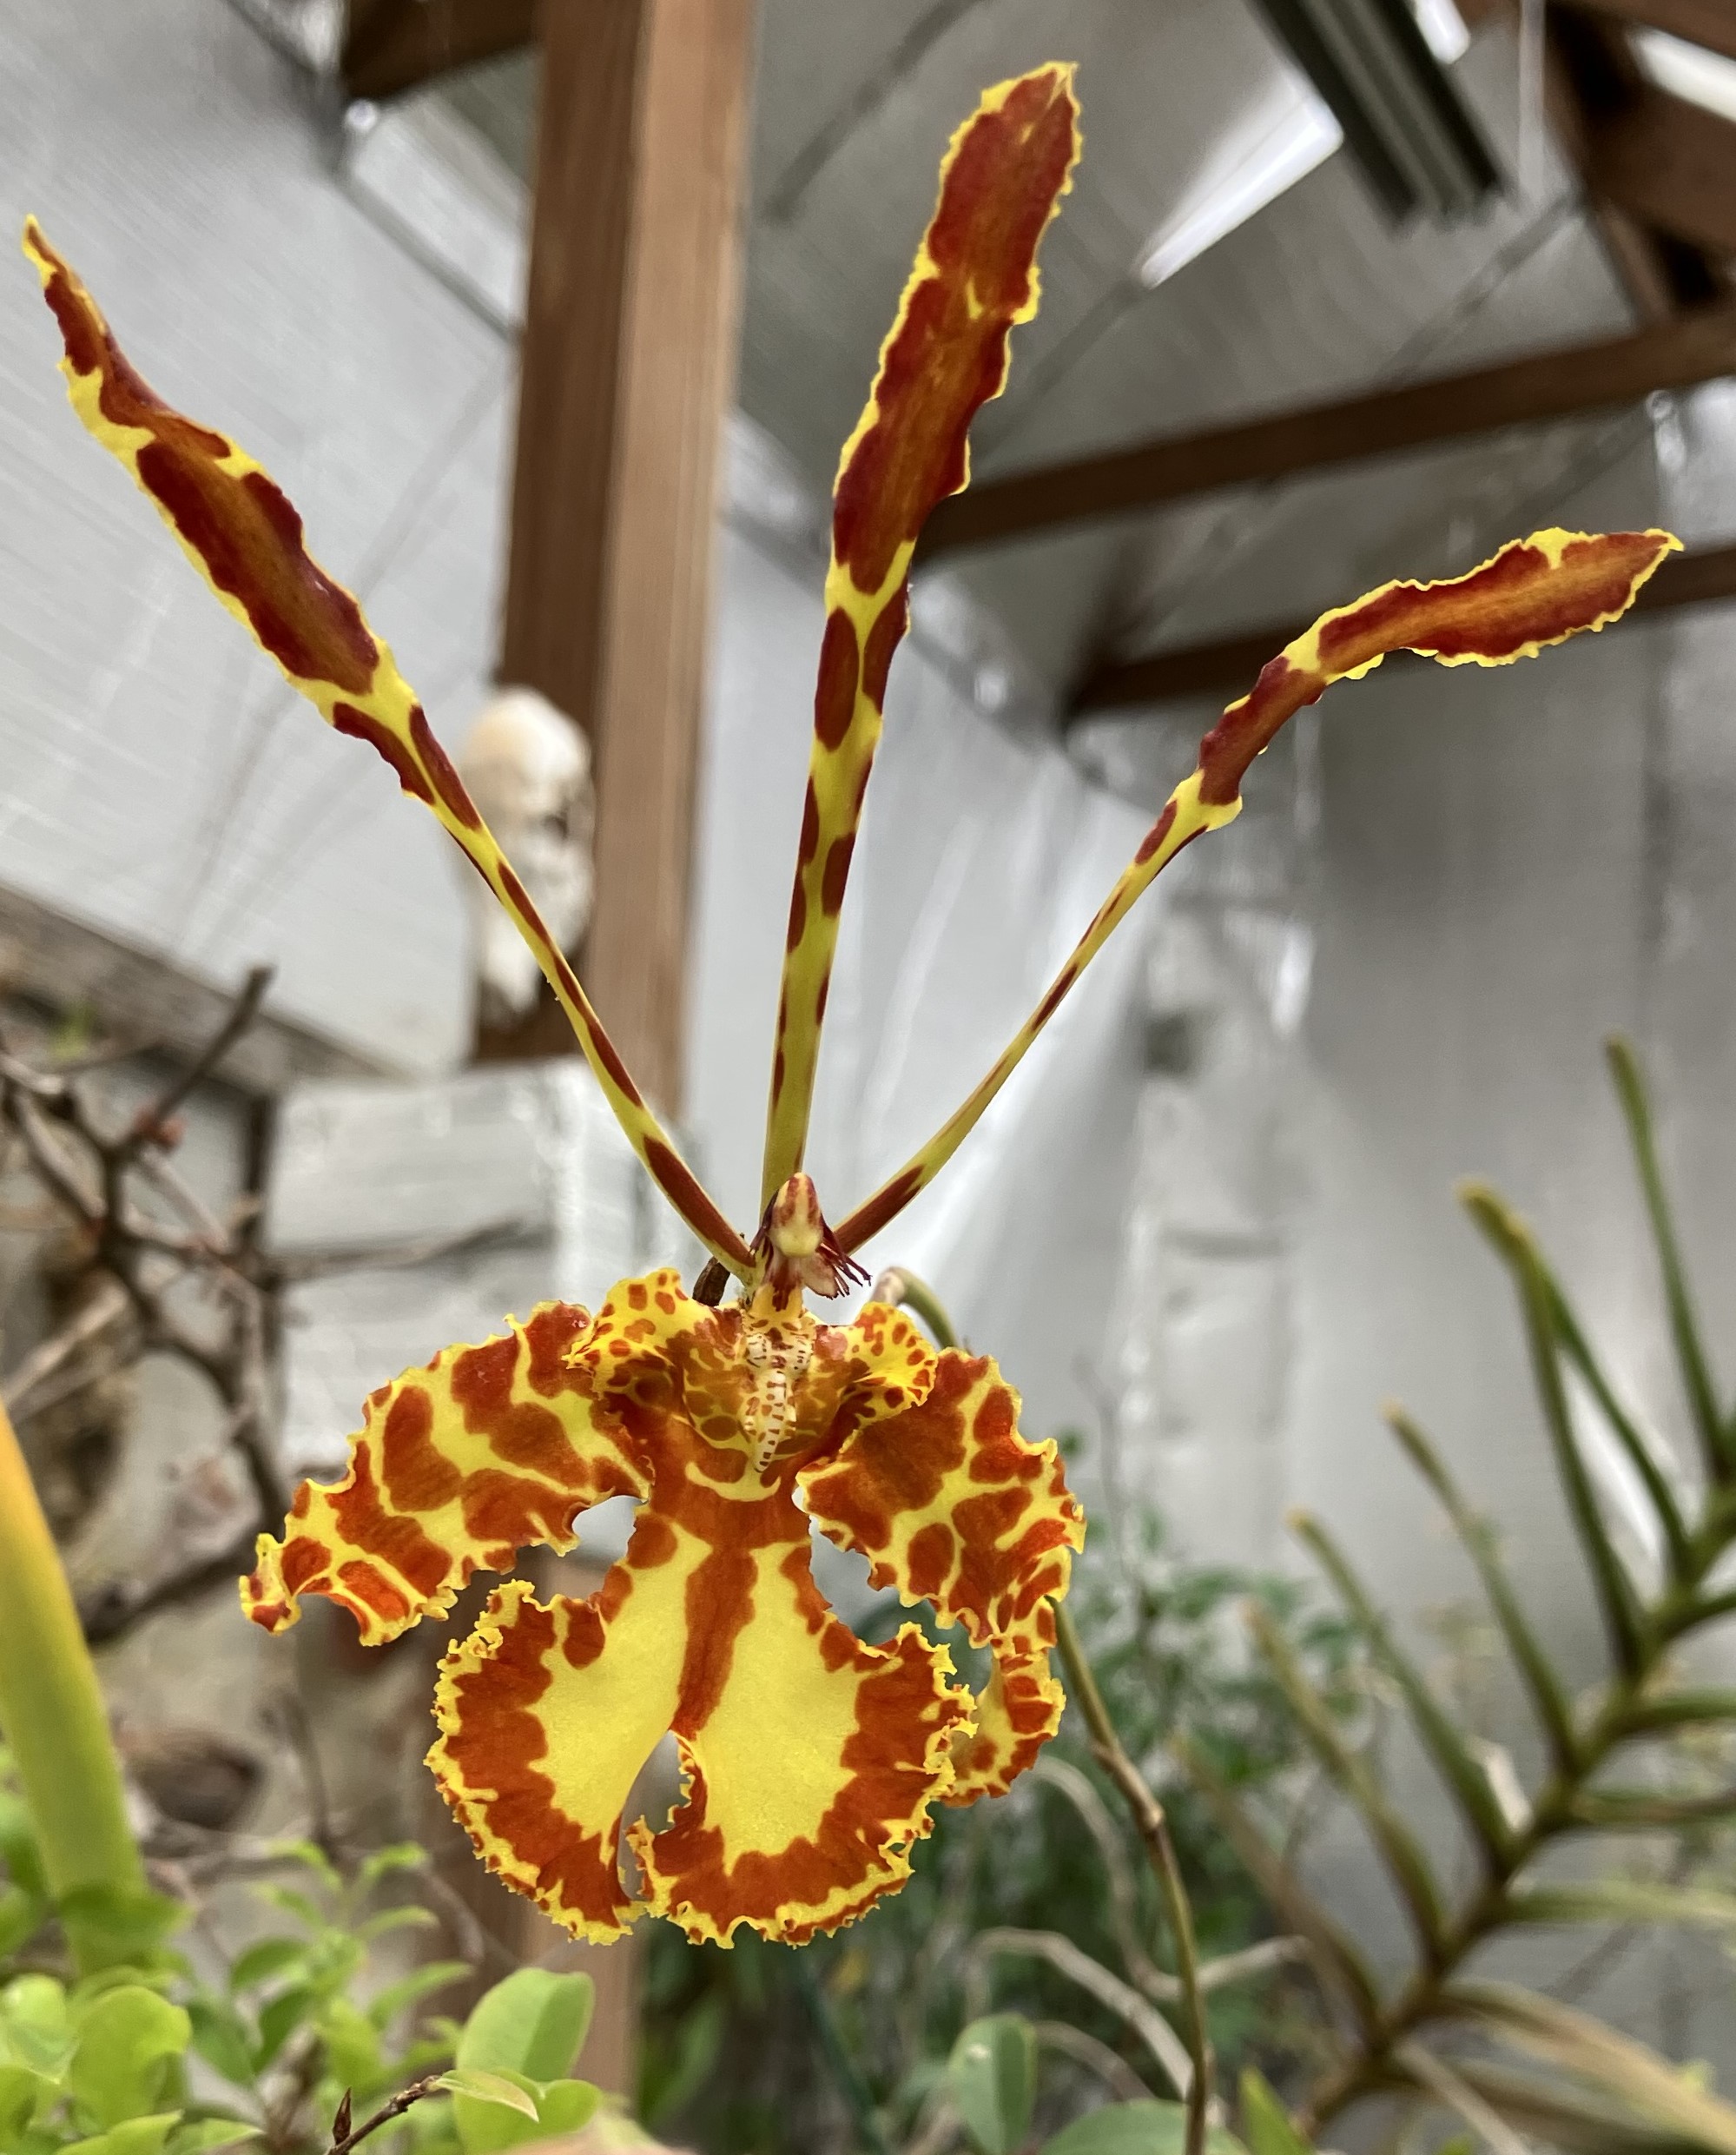 Psychopsis versteegiana flower--a yellow and brown orchid with long dorsal sepal and petals that resemble antennae